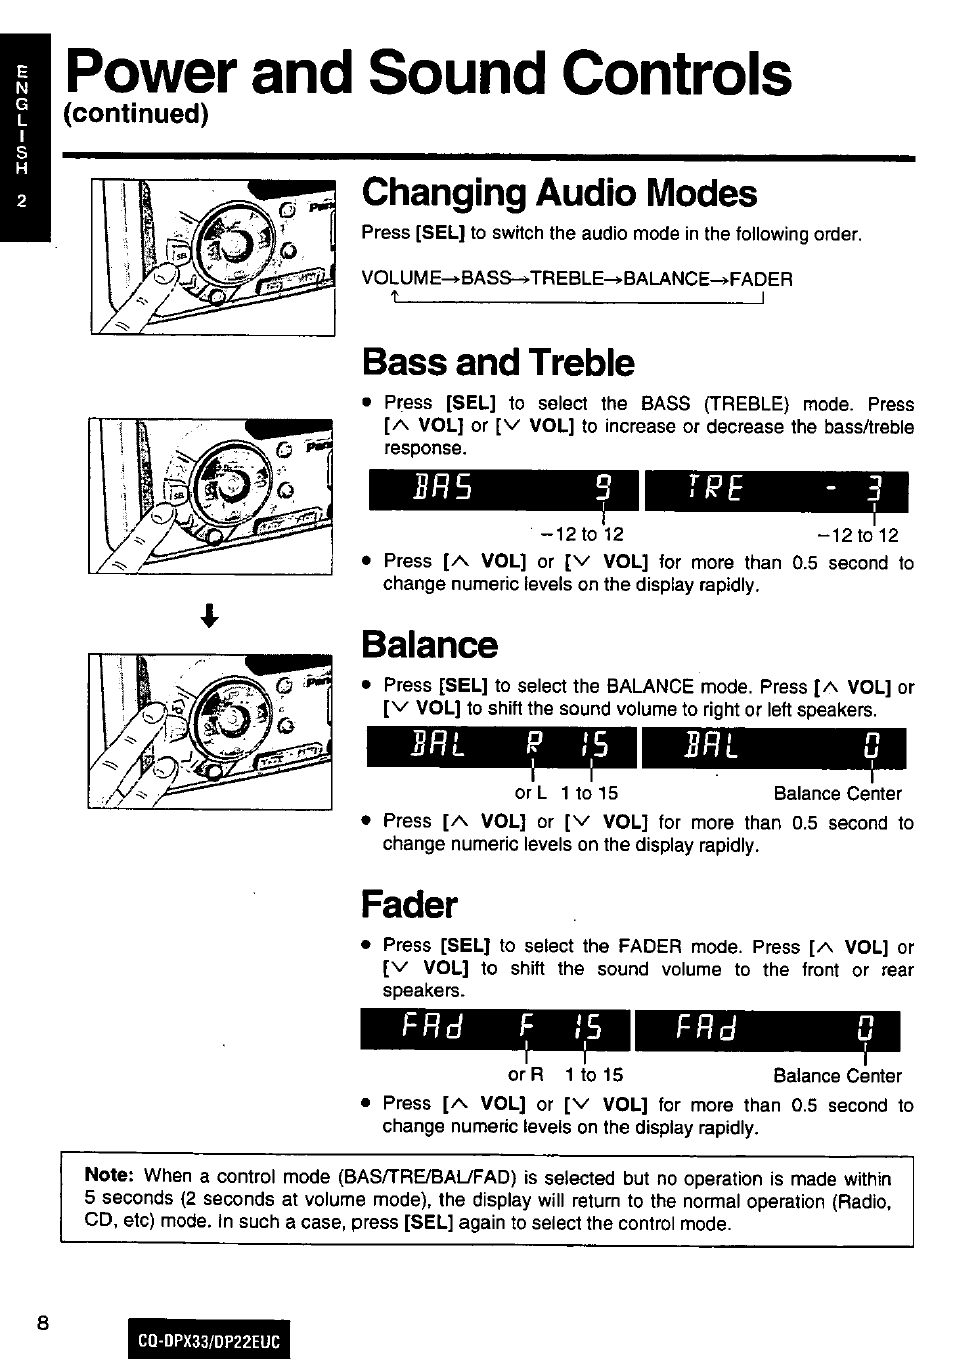 Power and sound controls, Continued), Changing audio modes | Bass and treble, Balance, Fader, B r 5, T p e, F r d | Panasonic CQ-DPX33 DP22EUC Manuel d'utilisation | Page 8 / 48